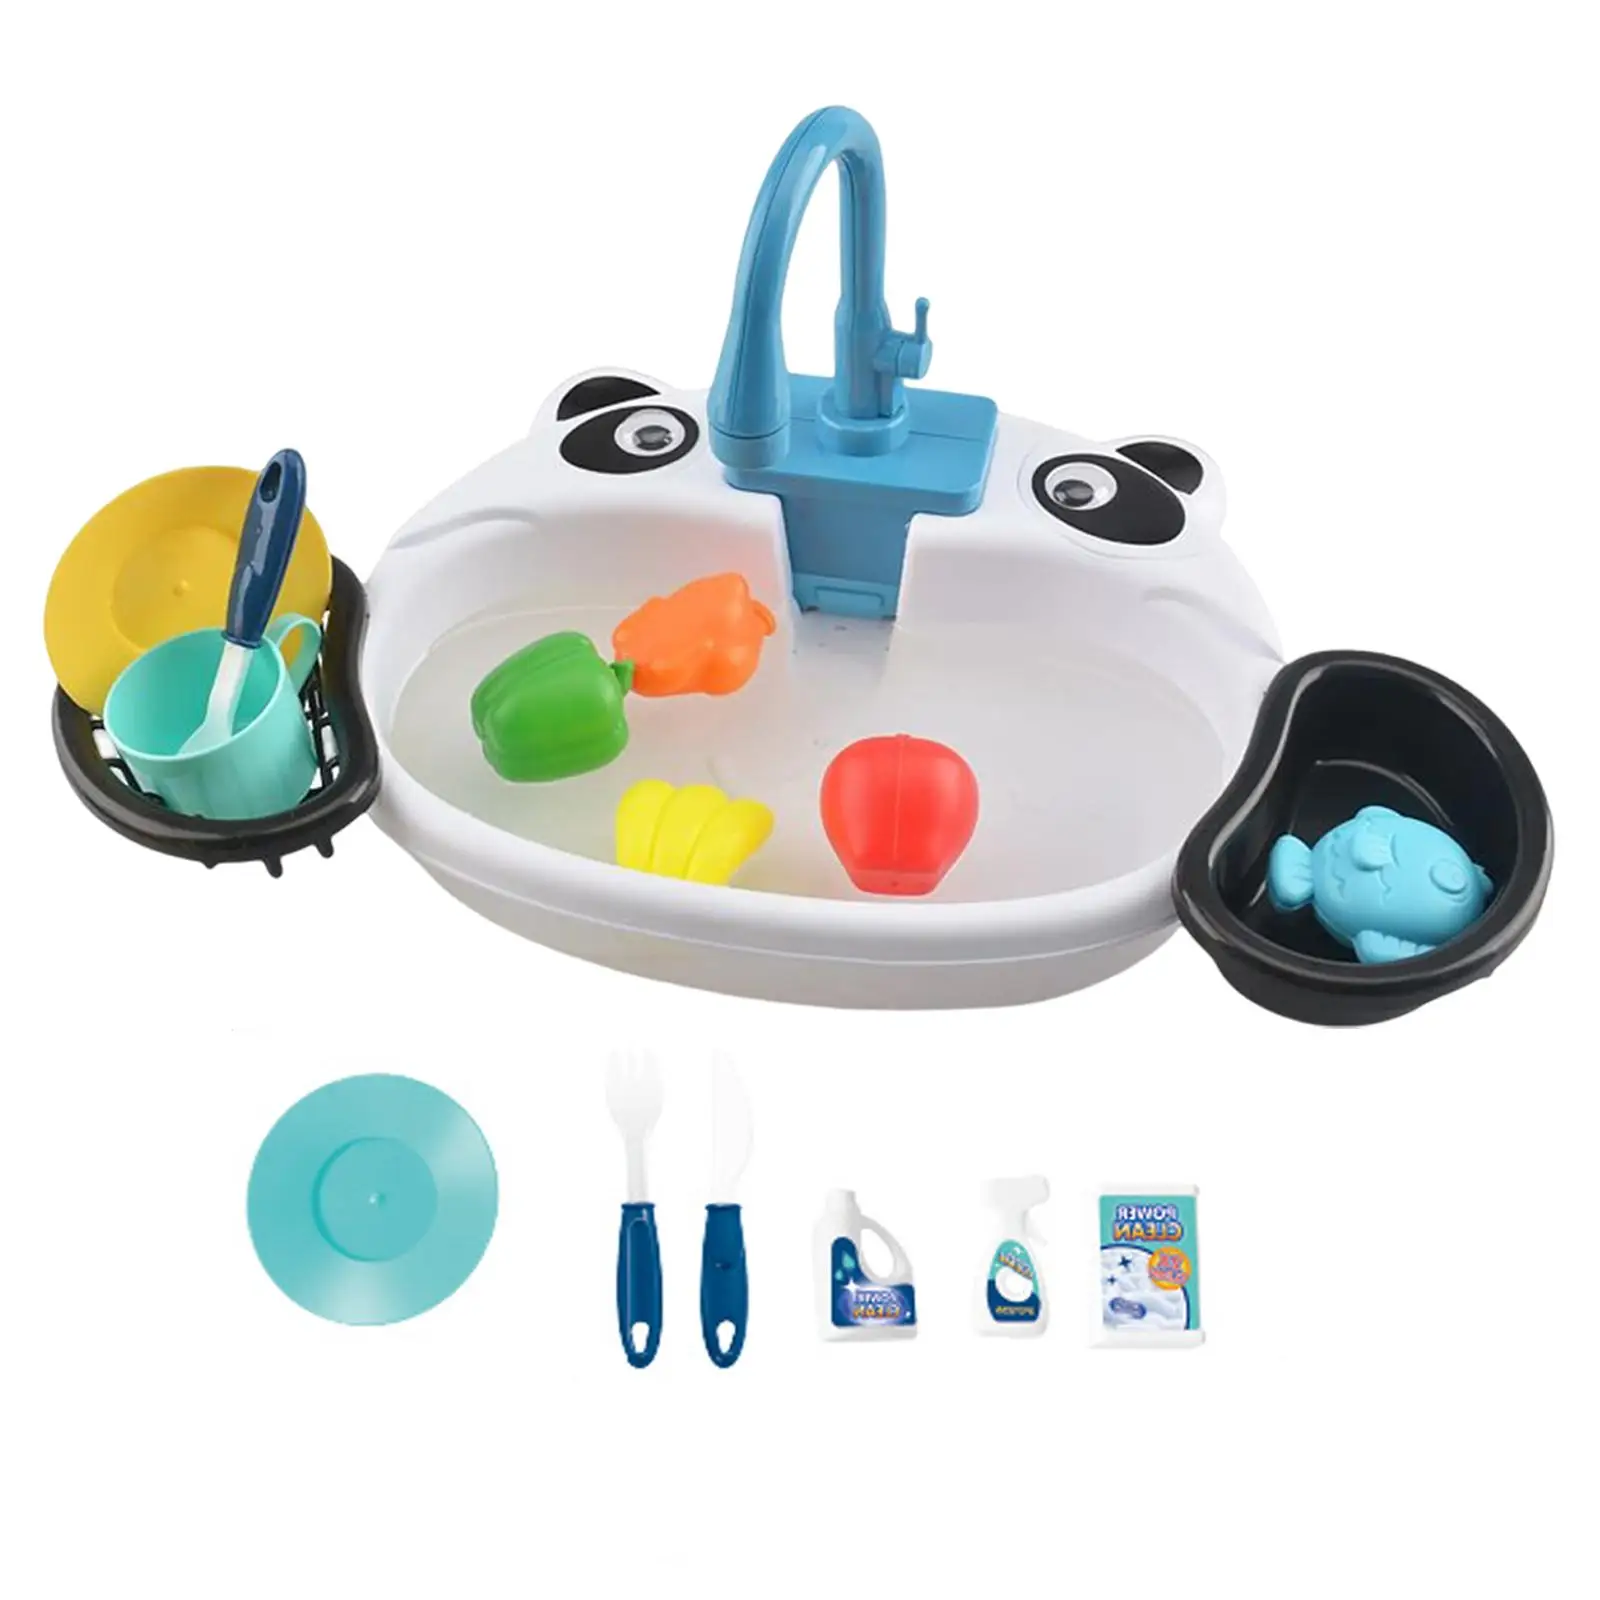 

Kitchen Sink Toys with Running Water Automatic Water Cycle System Plastic Electric Faucet Simulated Dishes for Children Toddlers